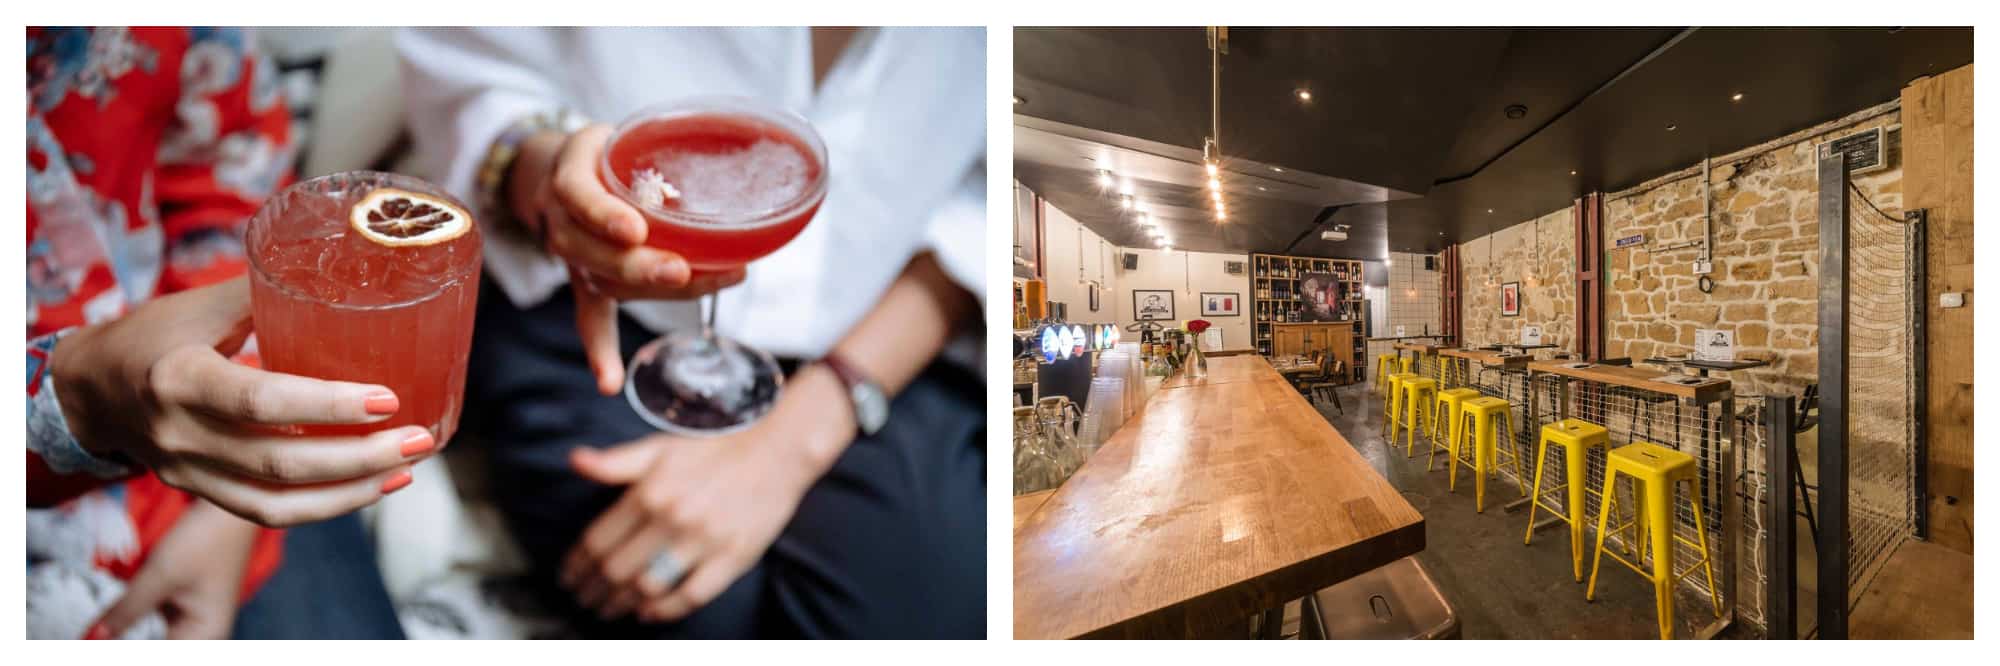 On left: Two friends hold bright cocktails from the bar Le Très Particulier in Montmartre, one a bright red and the other a soft grapefruit pink, garnished with a slice of blood orange. On right: The bar at Chez Bouboule in Paris' Pigalle neighborhood welcomes patrons to hop in for a drink and a game of pétanque, a classic summer pastime. 